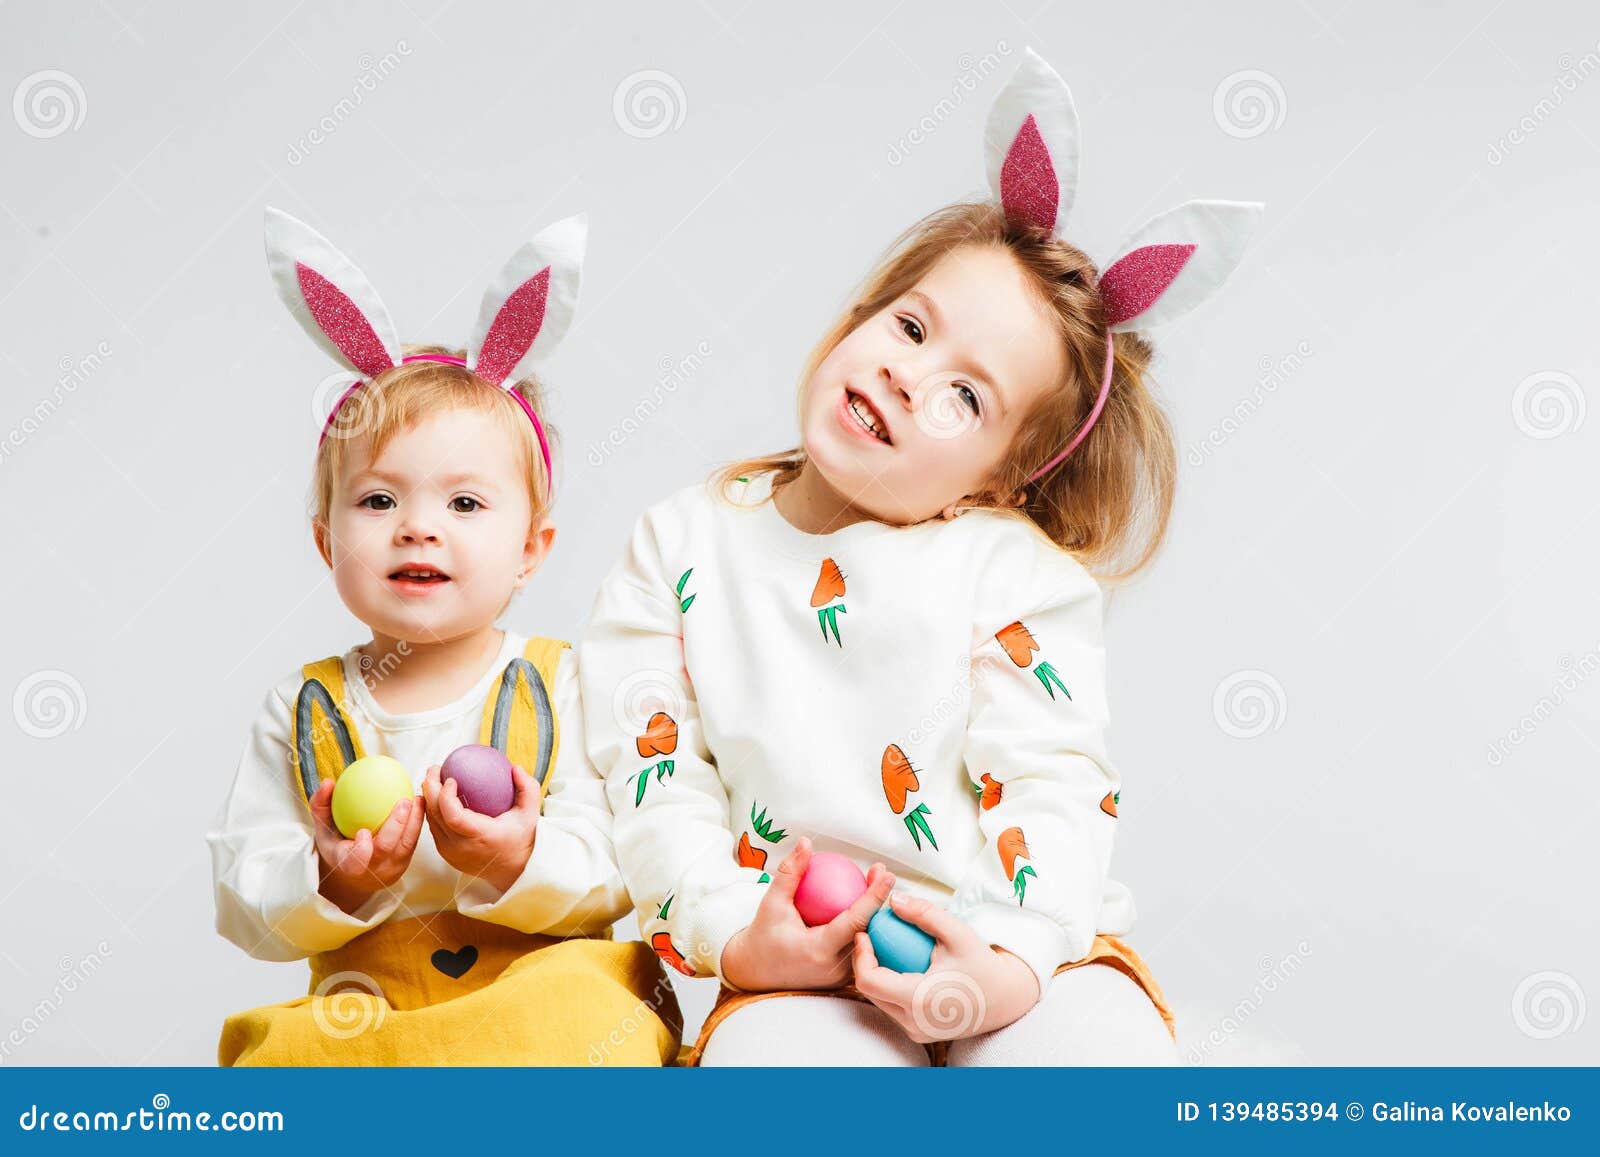 Happy Easter. Funny Children with Rabbit Ears Celebrate Easter. Light ...